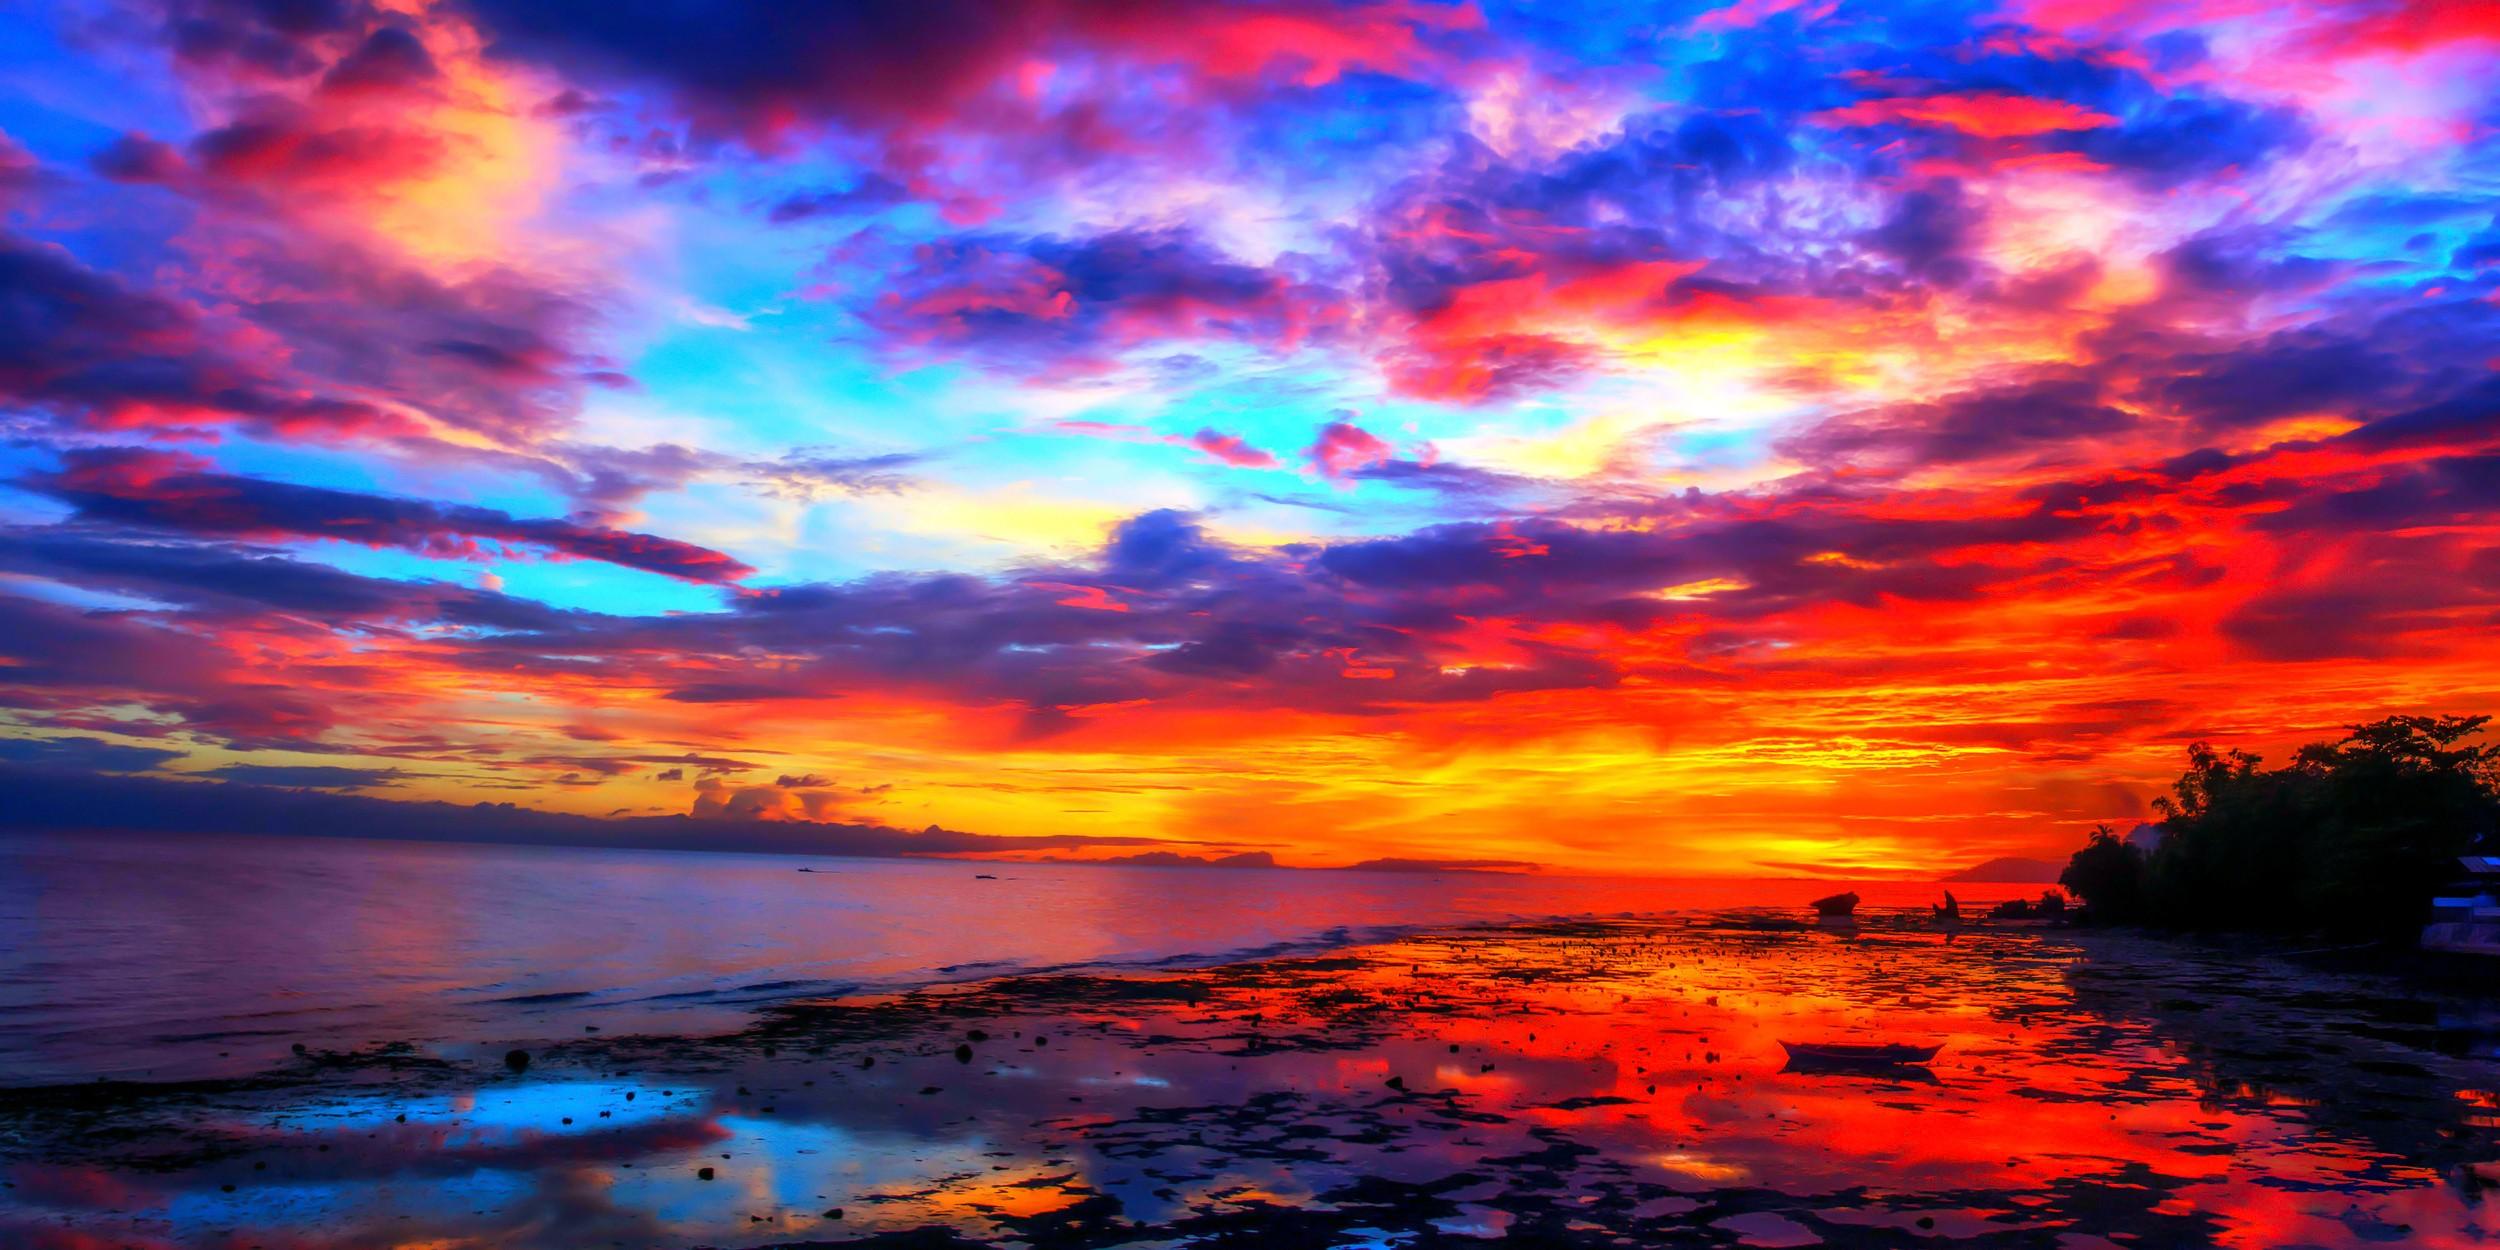 Download Sunsets Fiery Sunset Colorful Skies Ocean Sky Colors